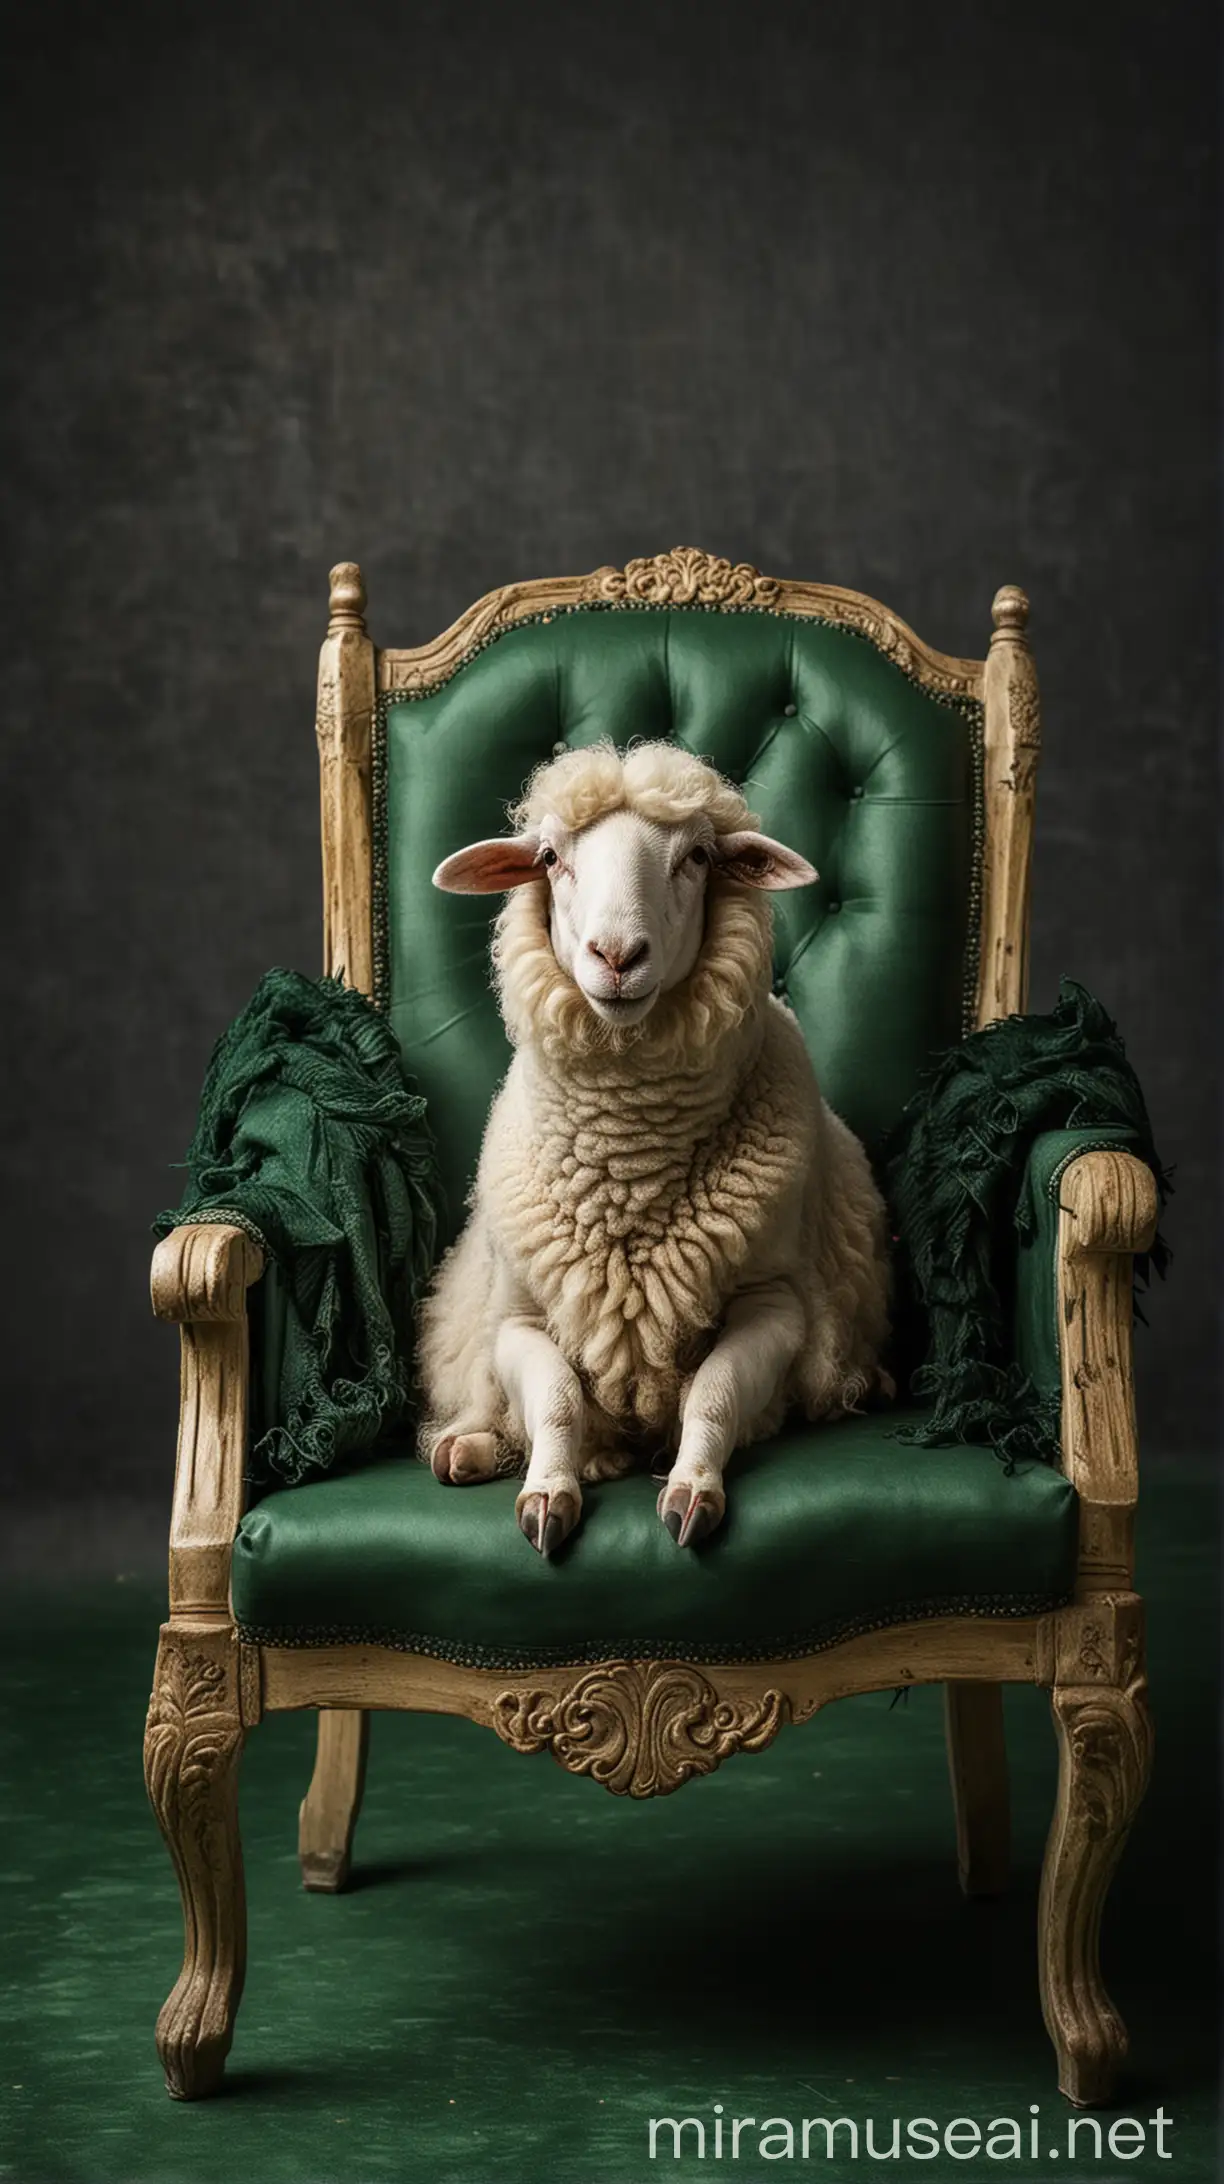 Sheep Sitting on Chair Eccentric Animal Haircut in Black and Green Background